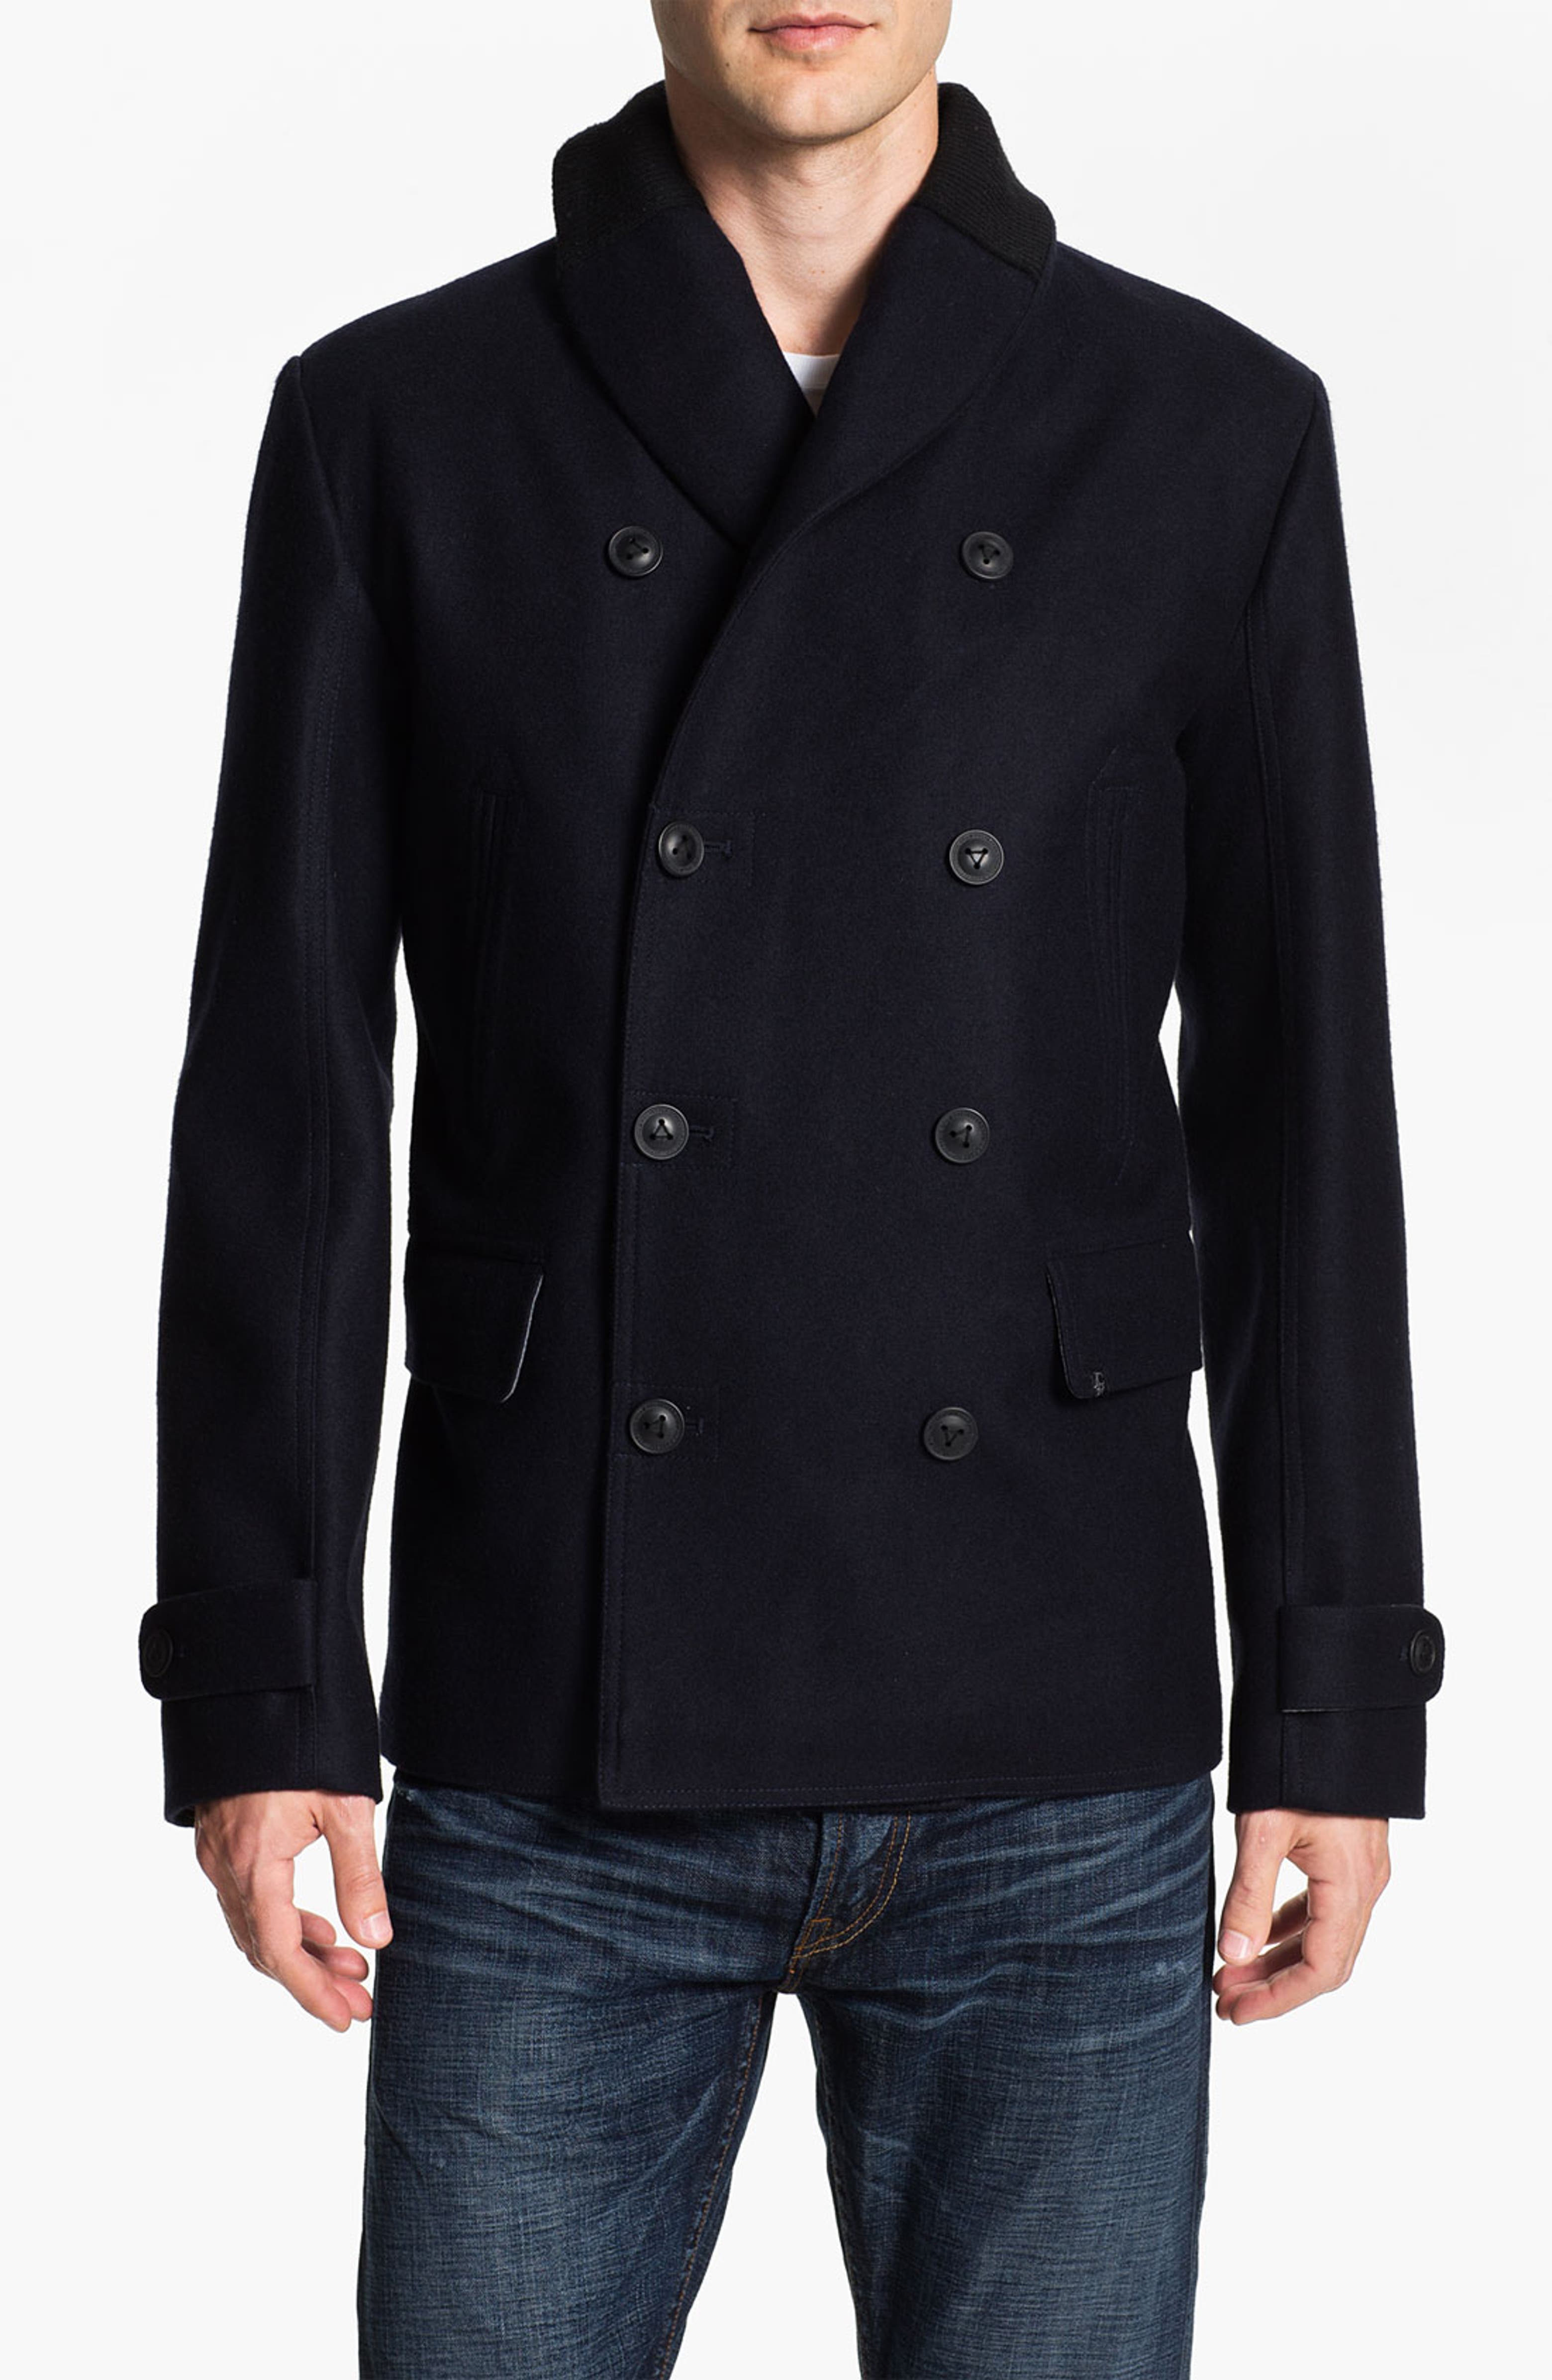 J.C. Rags Double Breasted Jacket | Nordstrom